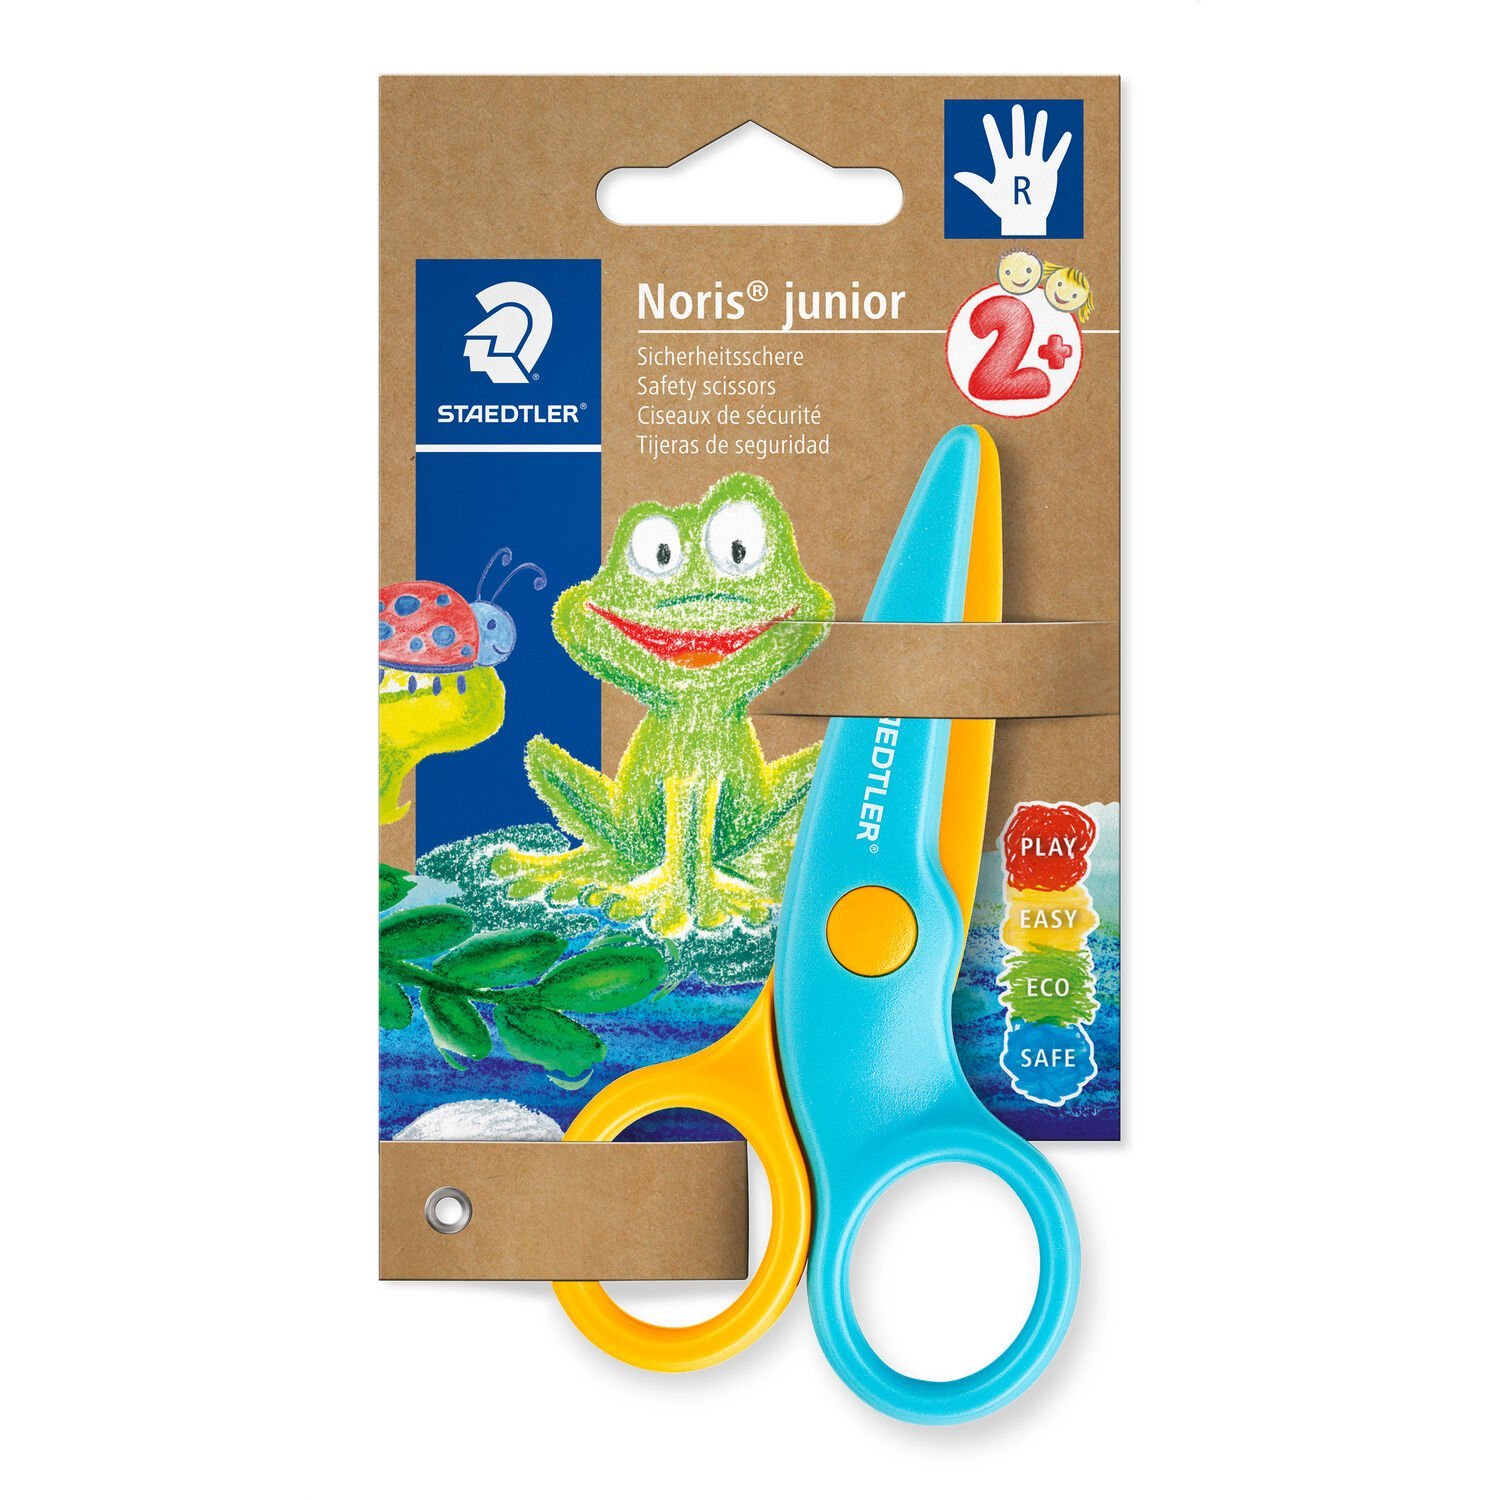 Cardboard card containing 1 safety scissors for toddlers